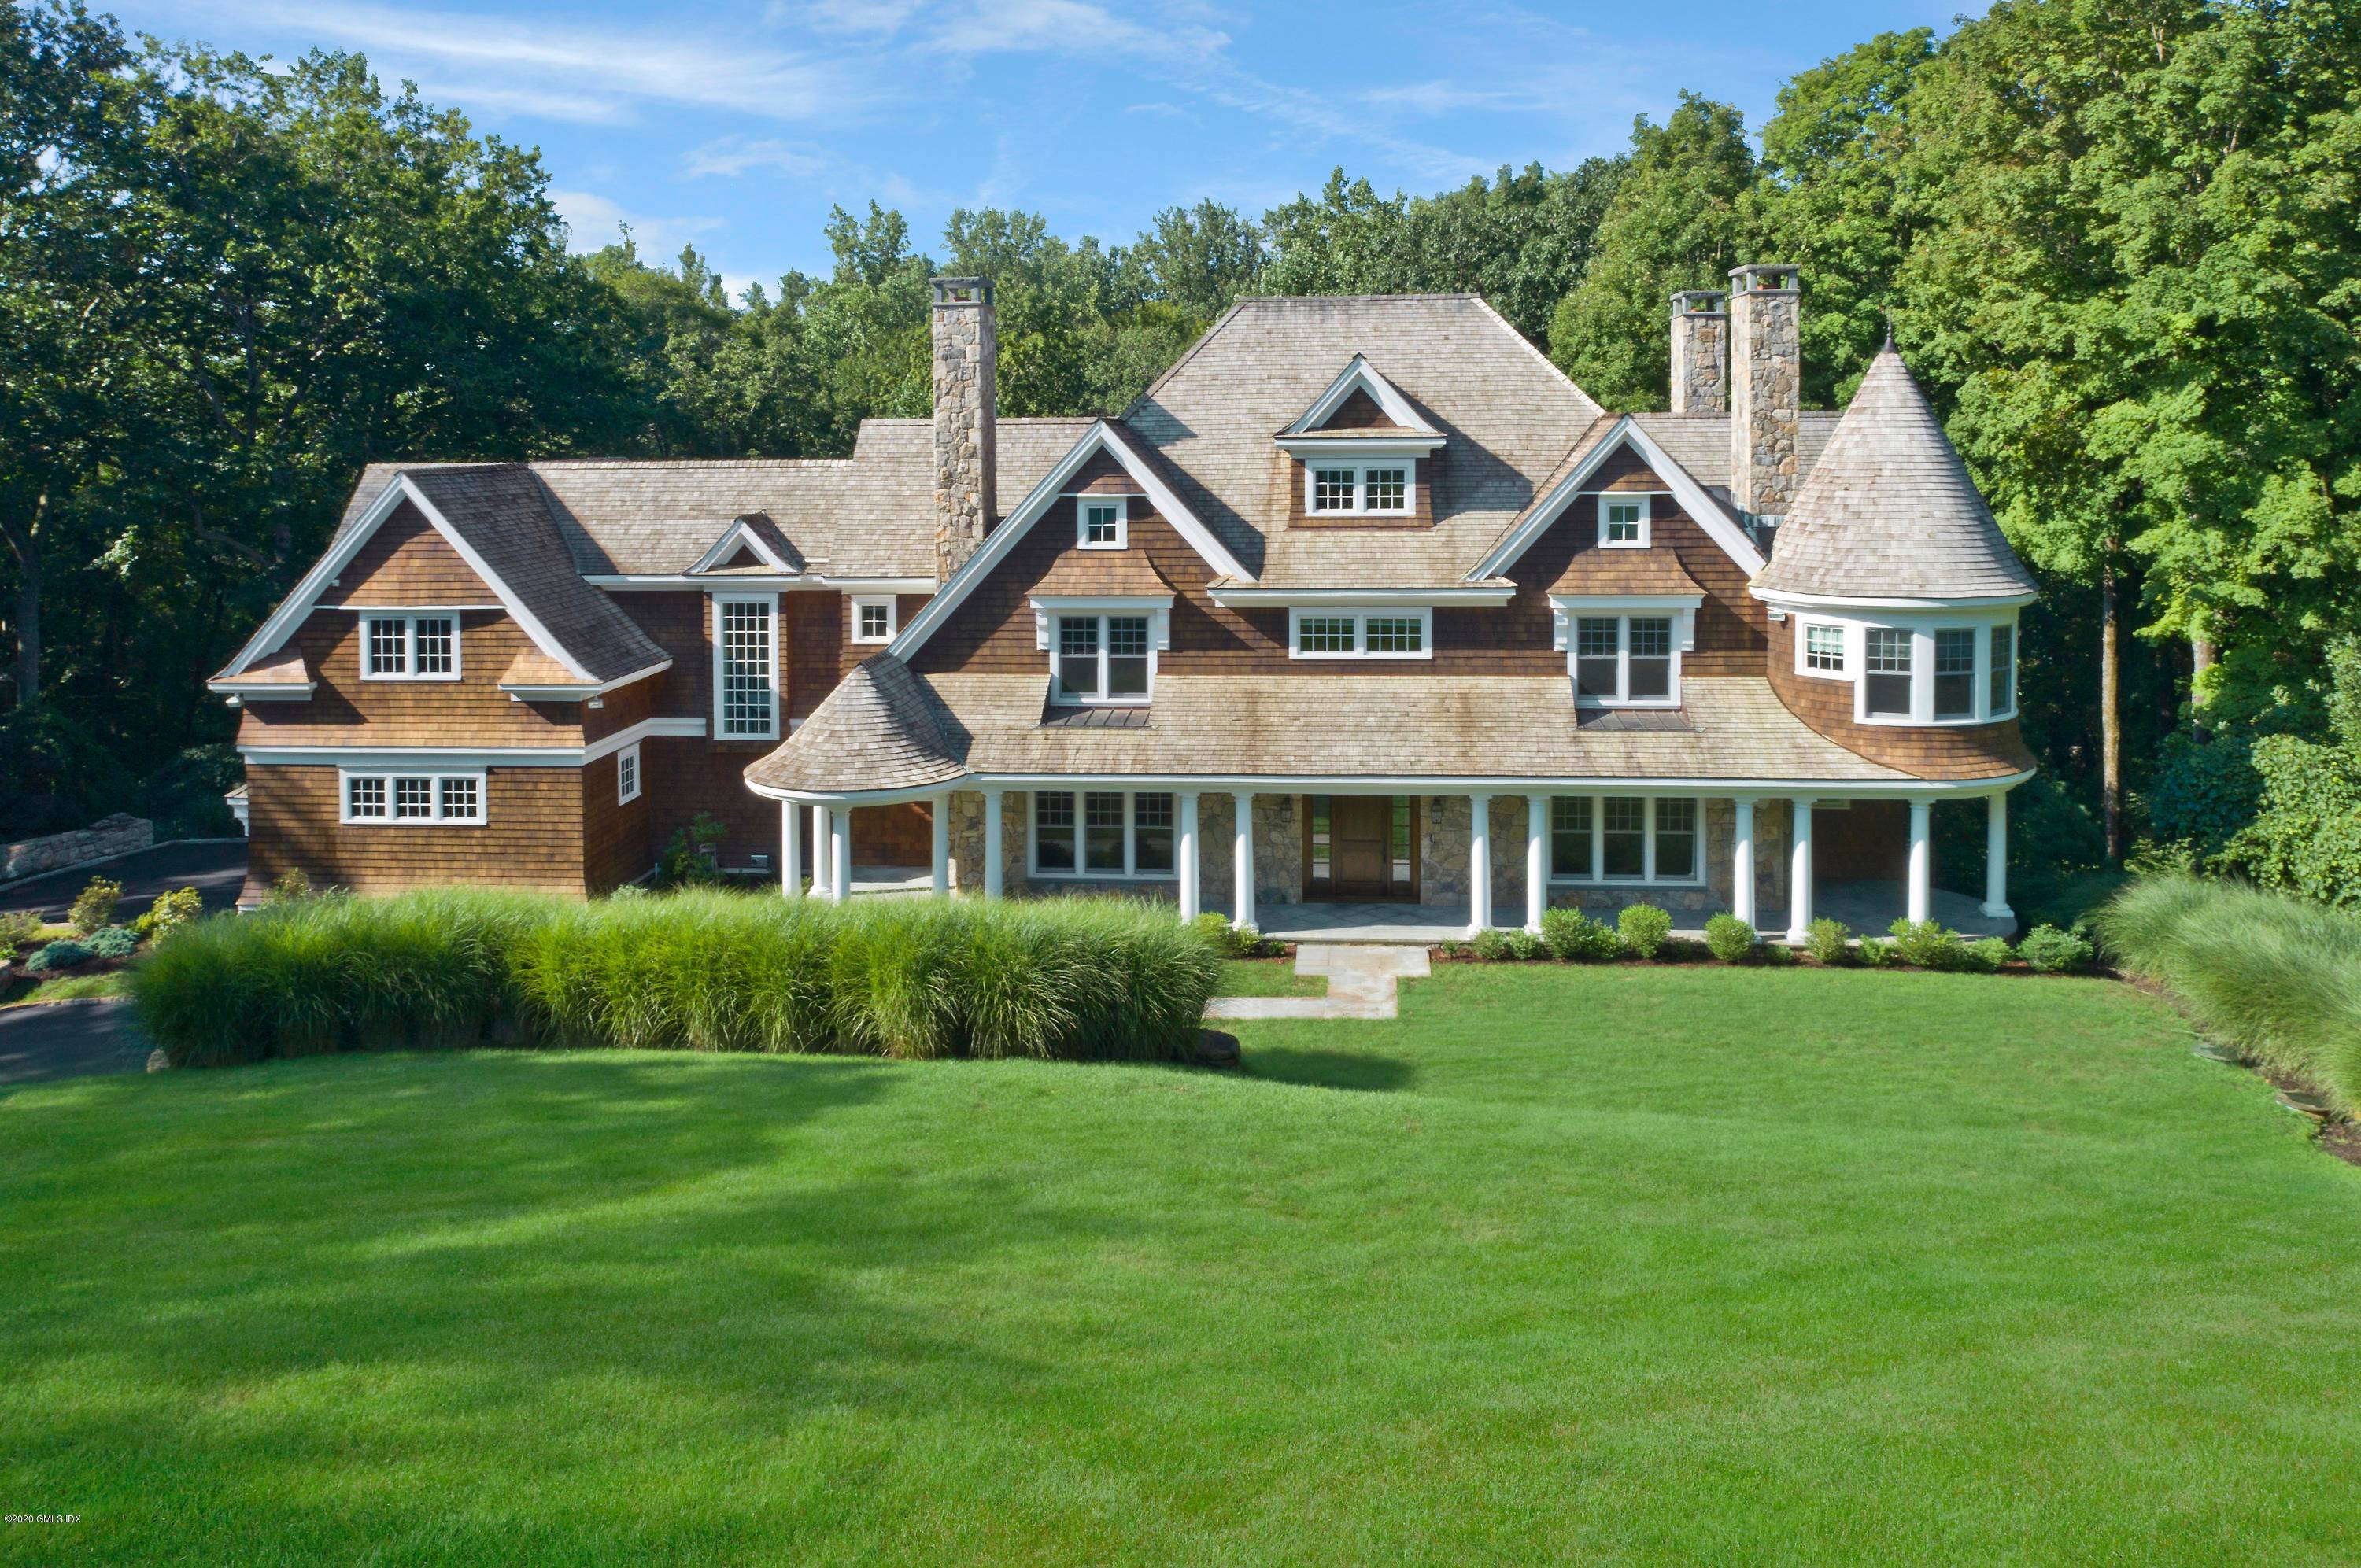 Set in a premier Mid country location, this stunning New England shingle style residence was designed by Steven Mueller architects, HOBI award winner for 2014 BestSpec Home in CT.